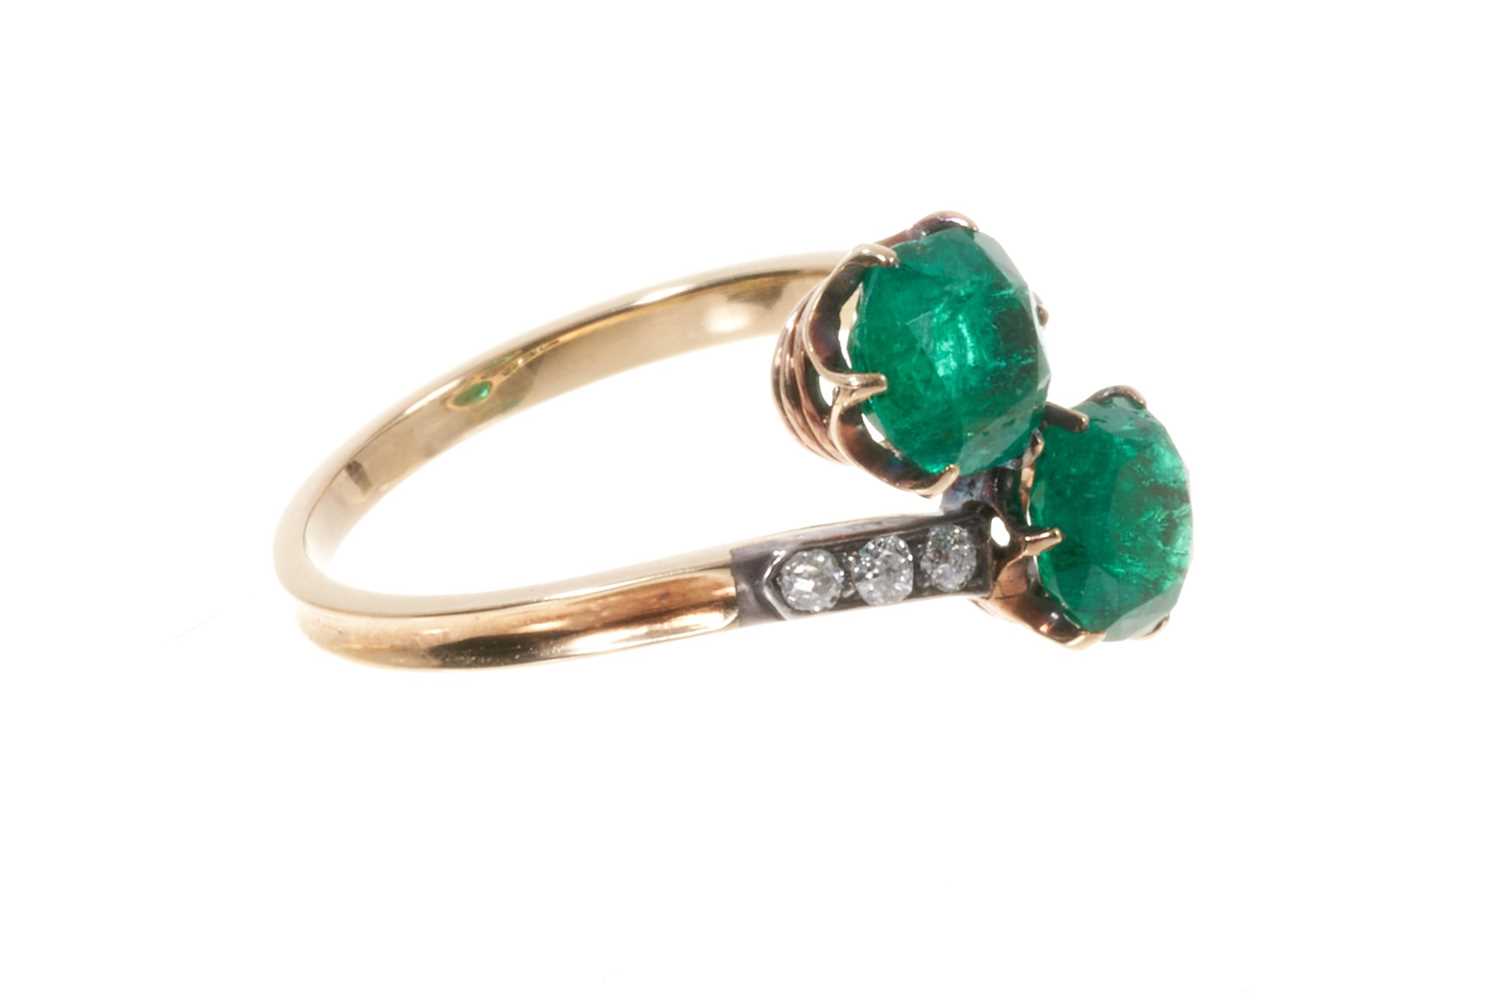 Antique emerald and diamond cross-over ring - Image 2 of 5